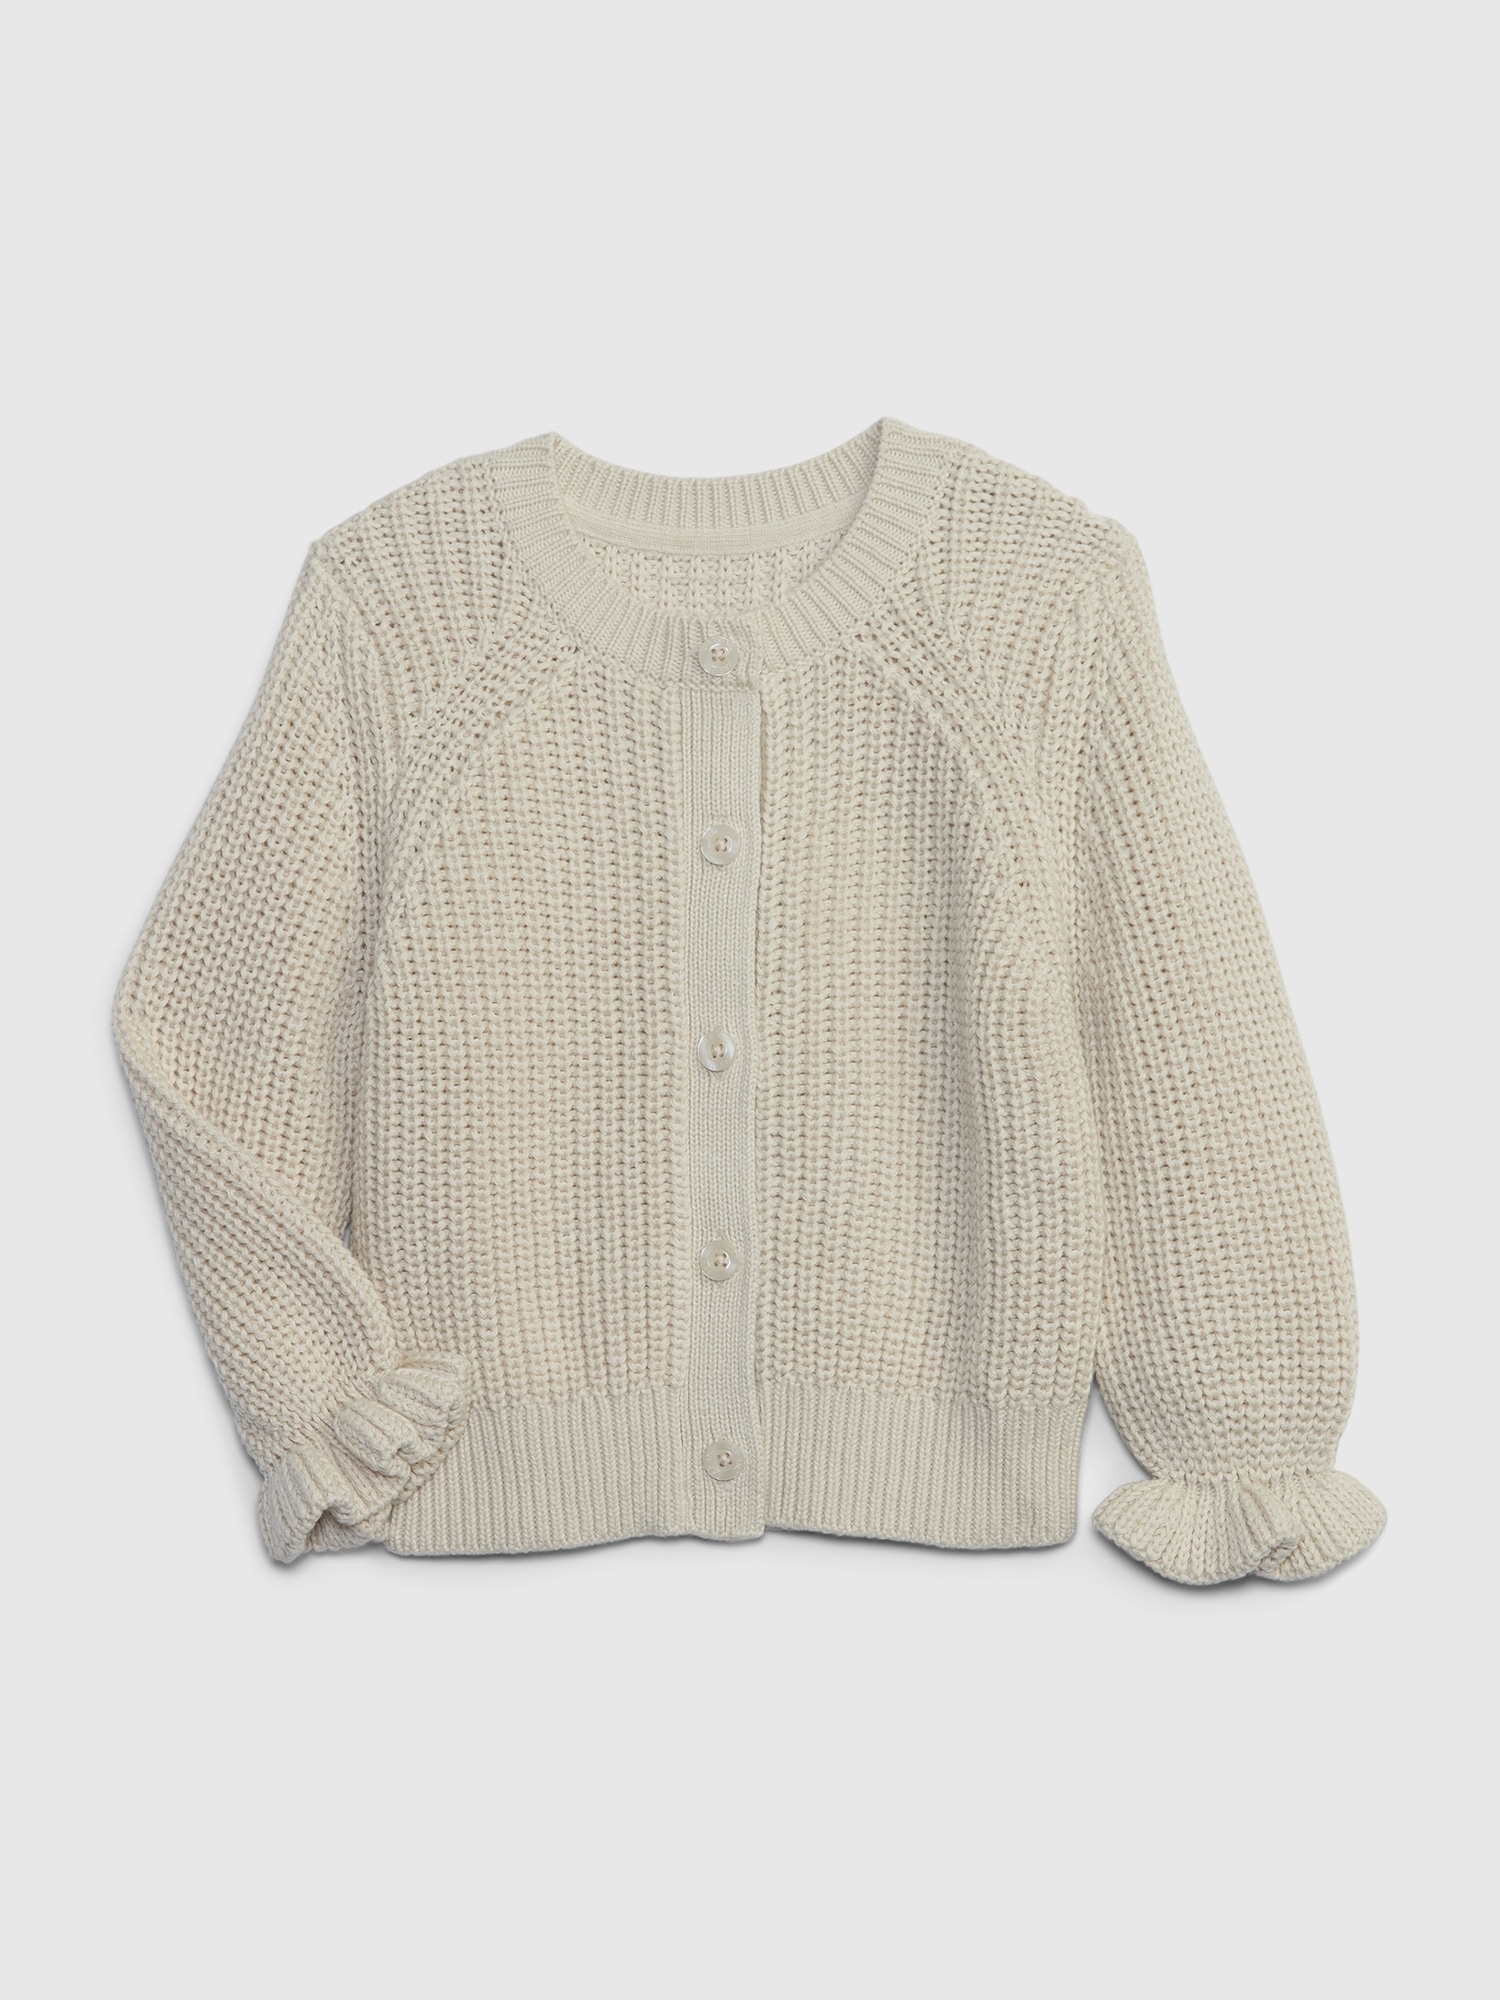 neutral knitted girls sweater